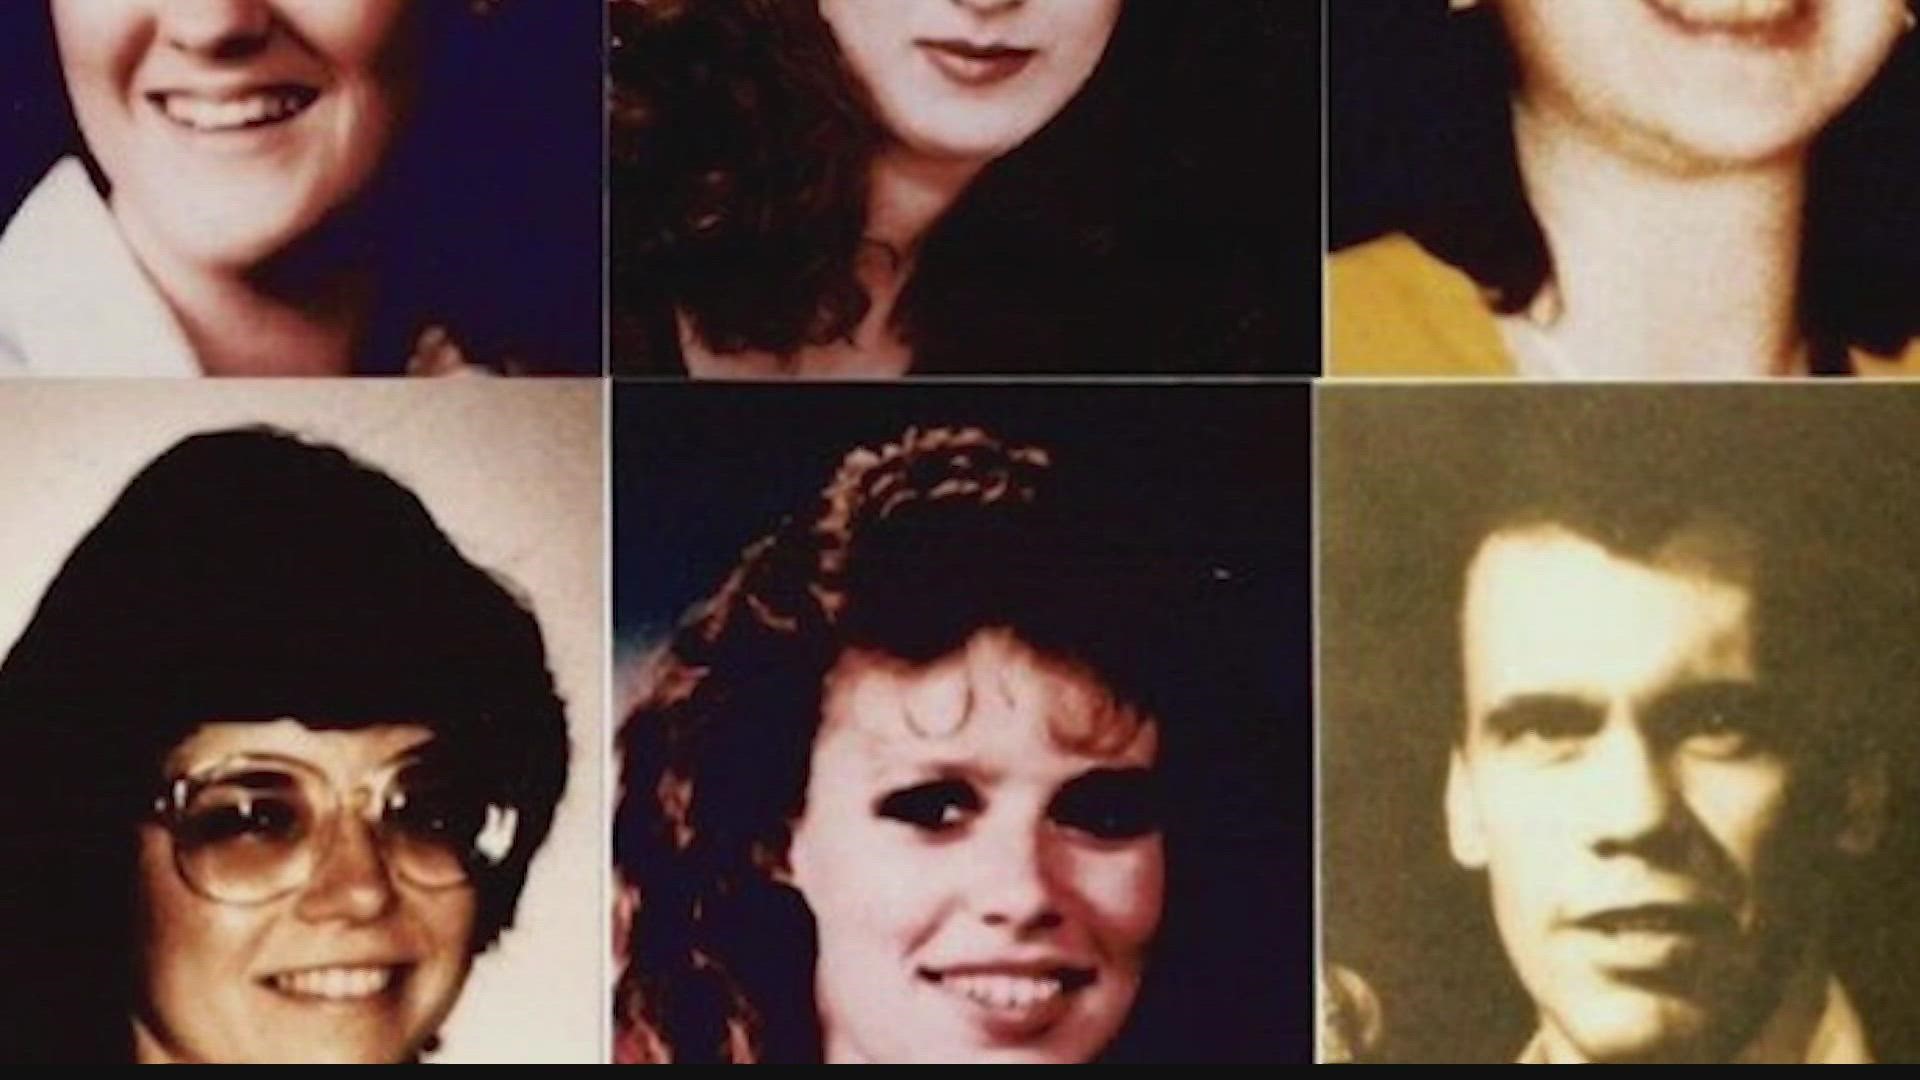 WTHR.com interviews detectives from Terre Haute and Indianapolis, who say they remain committed to solving what happened to the I-70 Killer's Indiana victims.